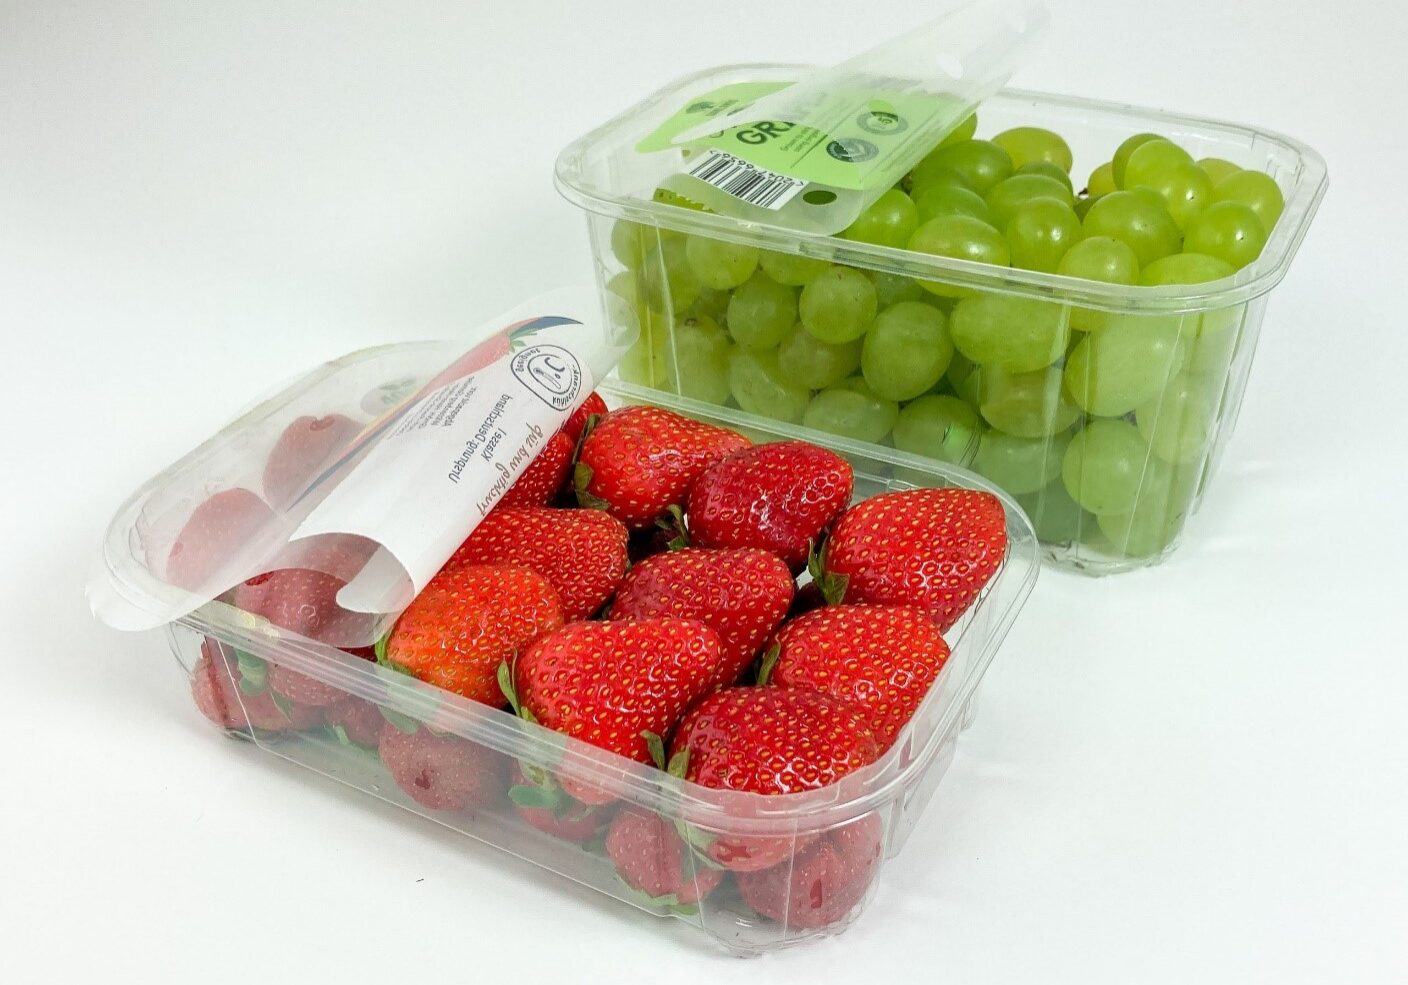 Two containers of strawberries and grapes on a table.